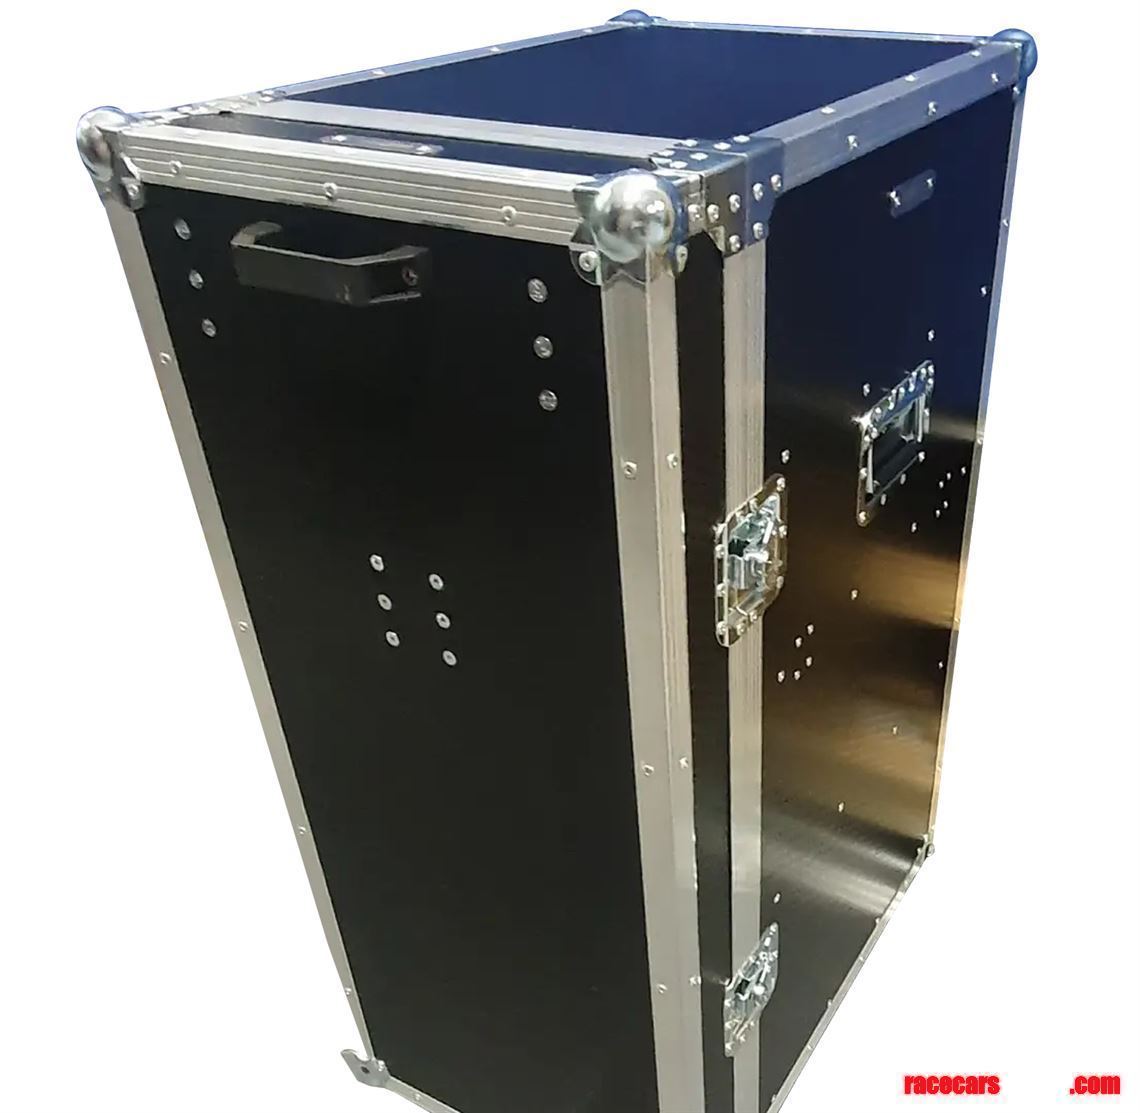 flight-case-roll-cabinet-with-euro-containers